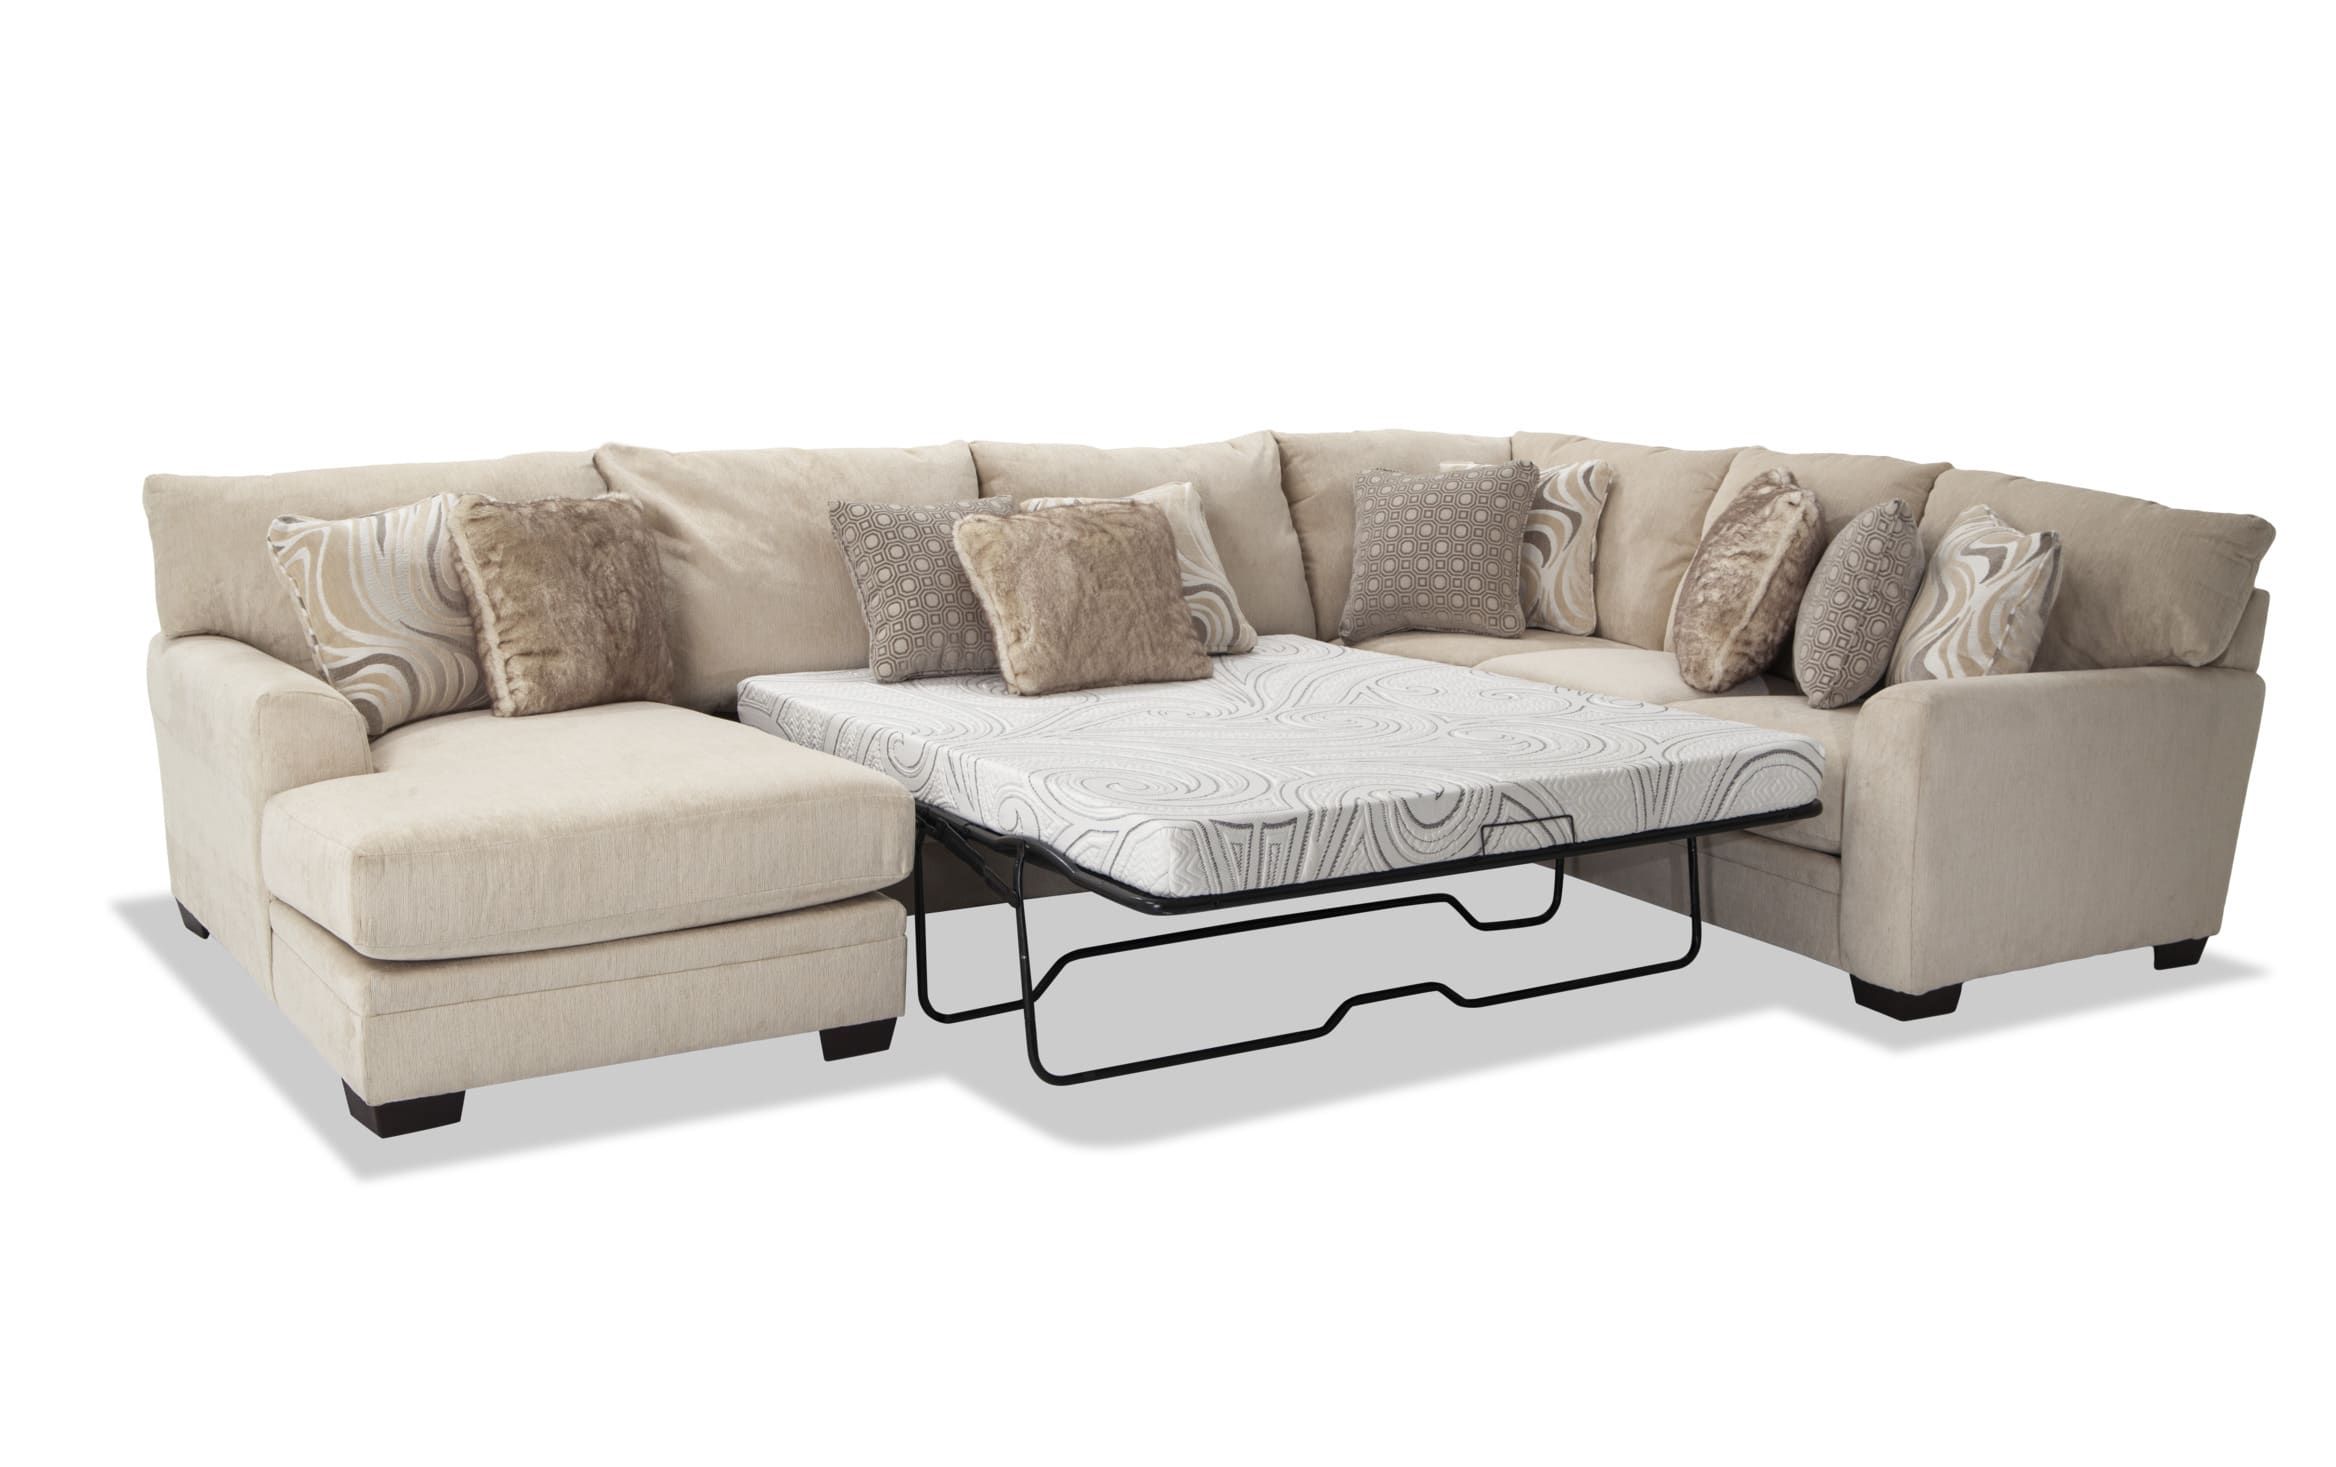 Luxe Cream 4 Piece Right Arm Facing Bob O Pedic Cooling Queen Sleeper  Sectional With Chaise | Bob's Discount Furniture Within Left Or Right Facing Sleeper Sectional Sofas (Gallery 1 of 20)